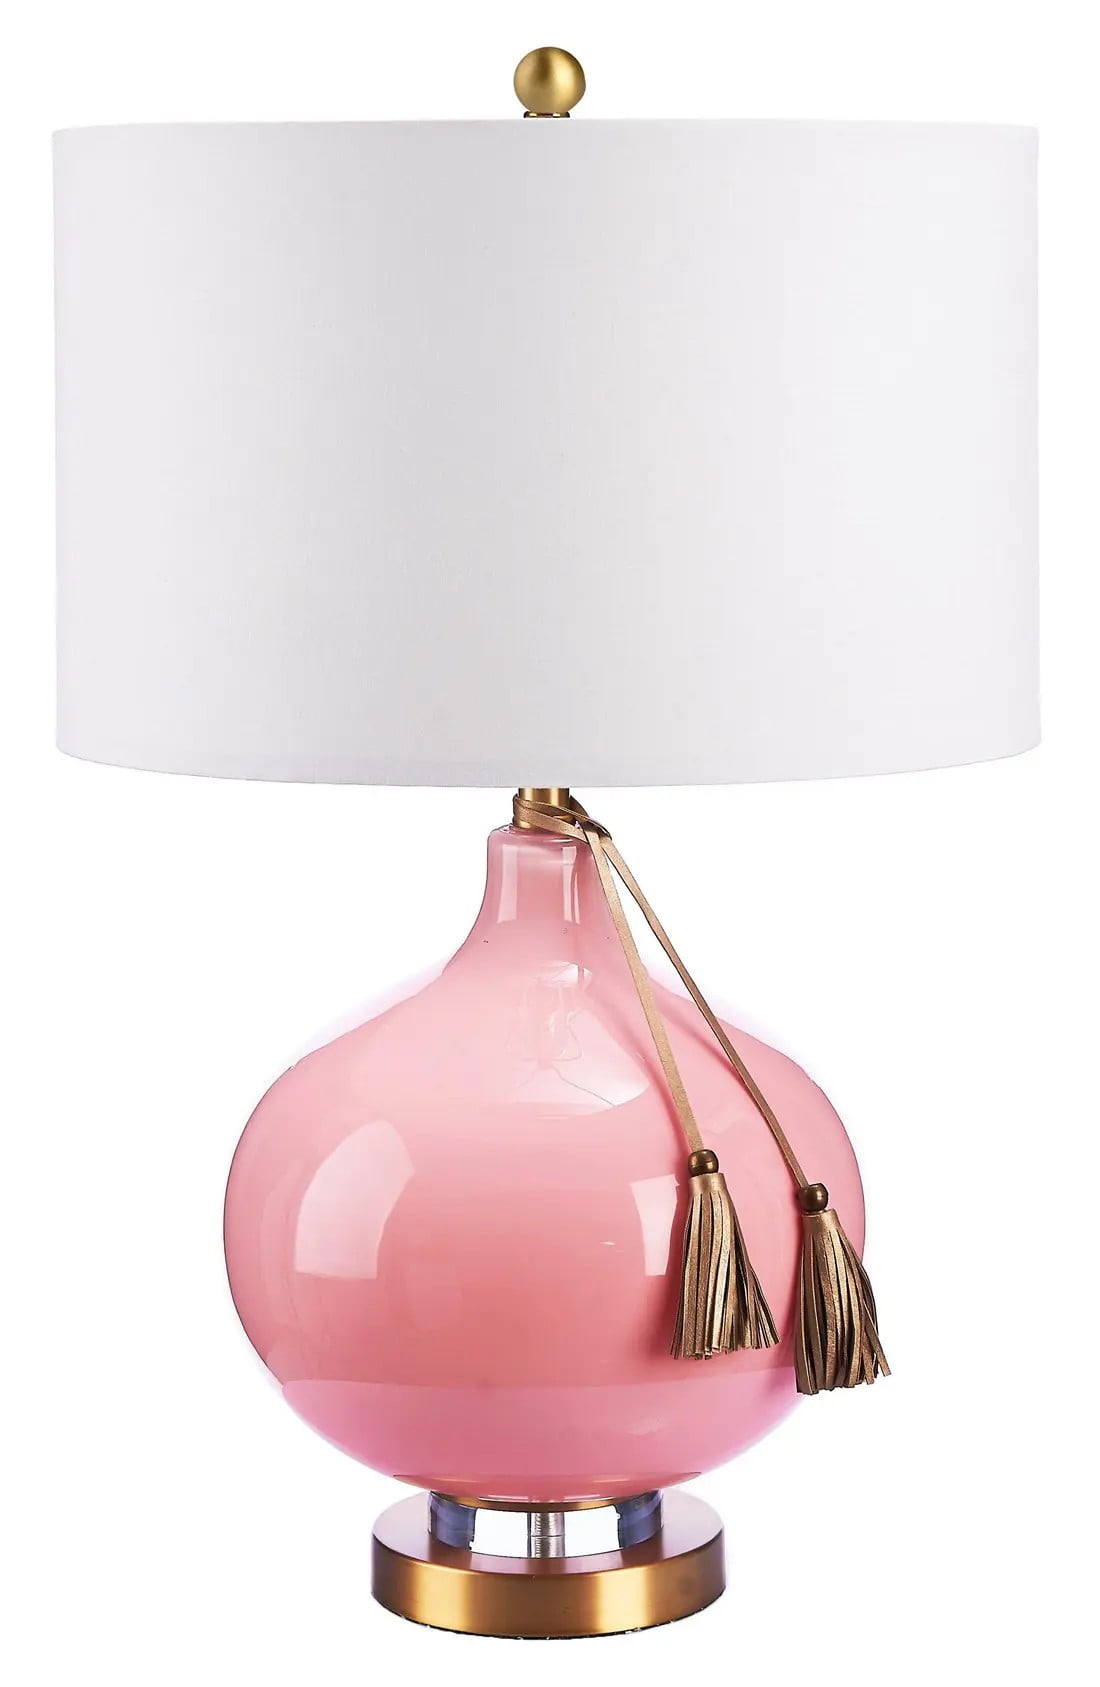 Click for more info about Tassel Table Lamp